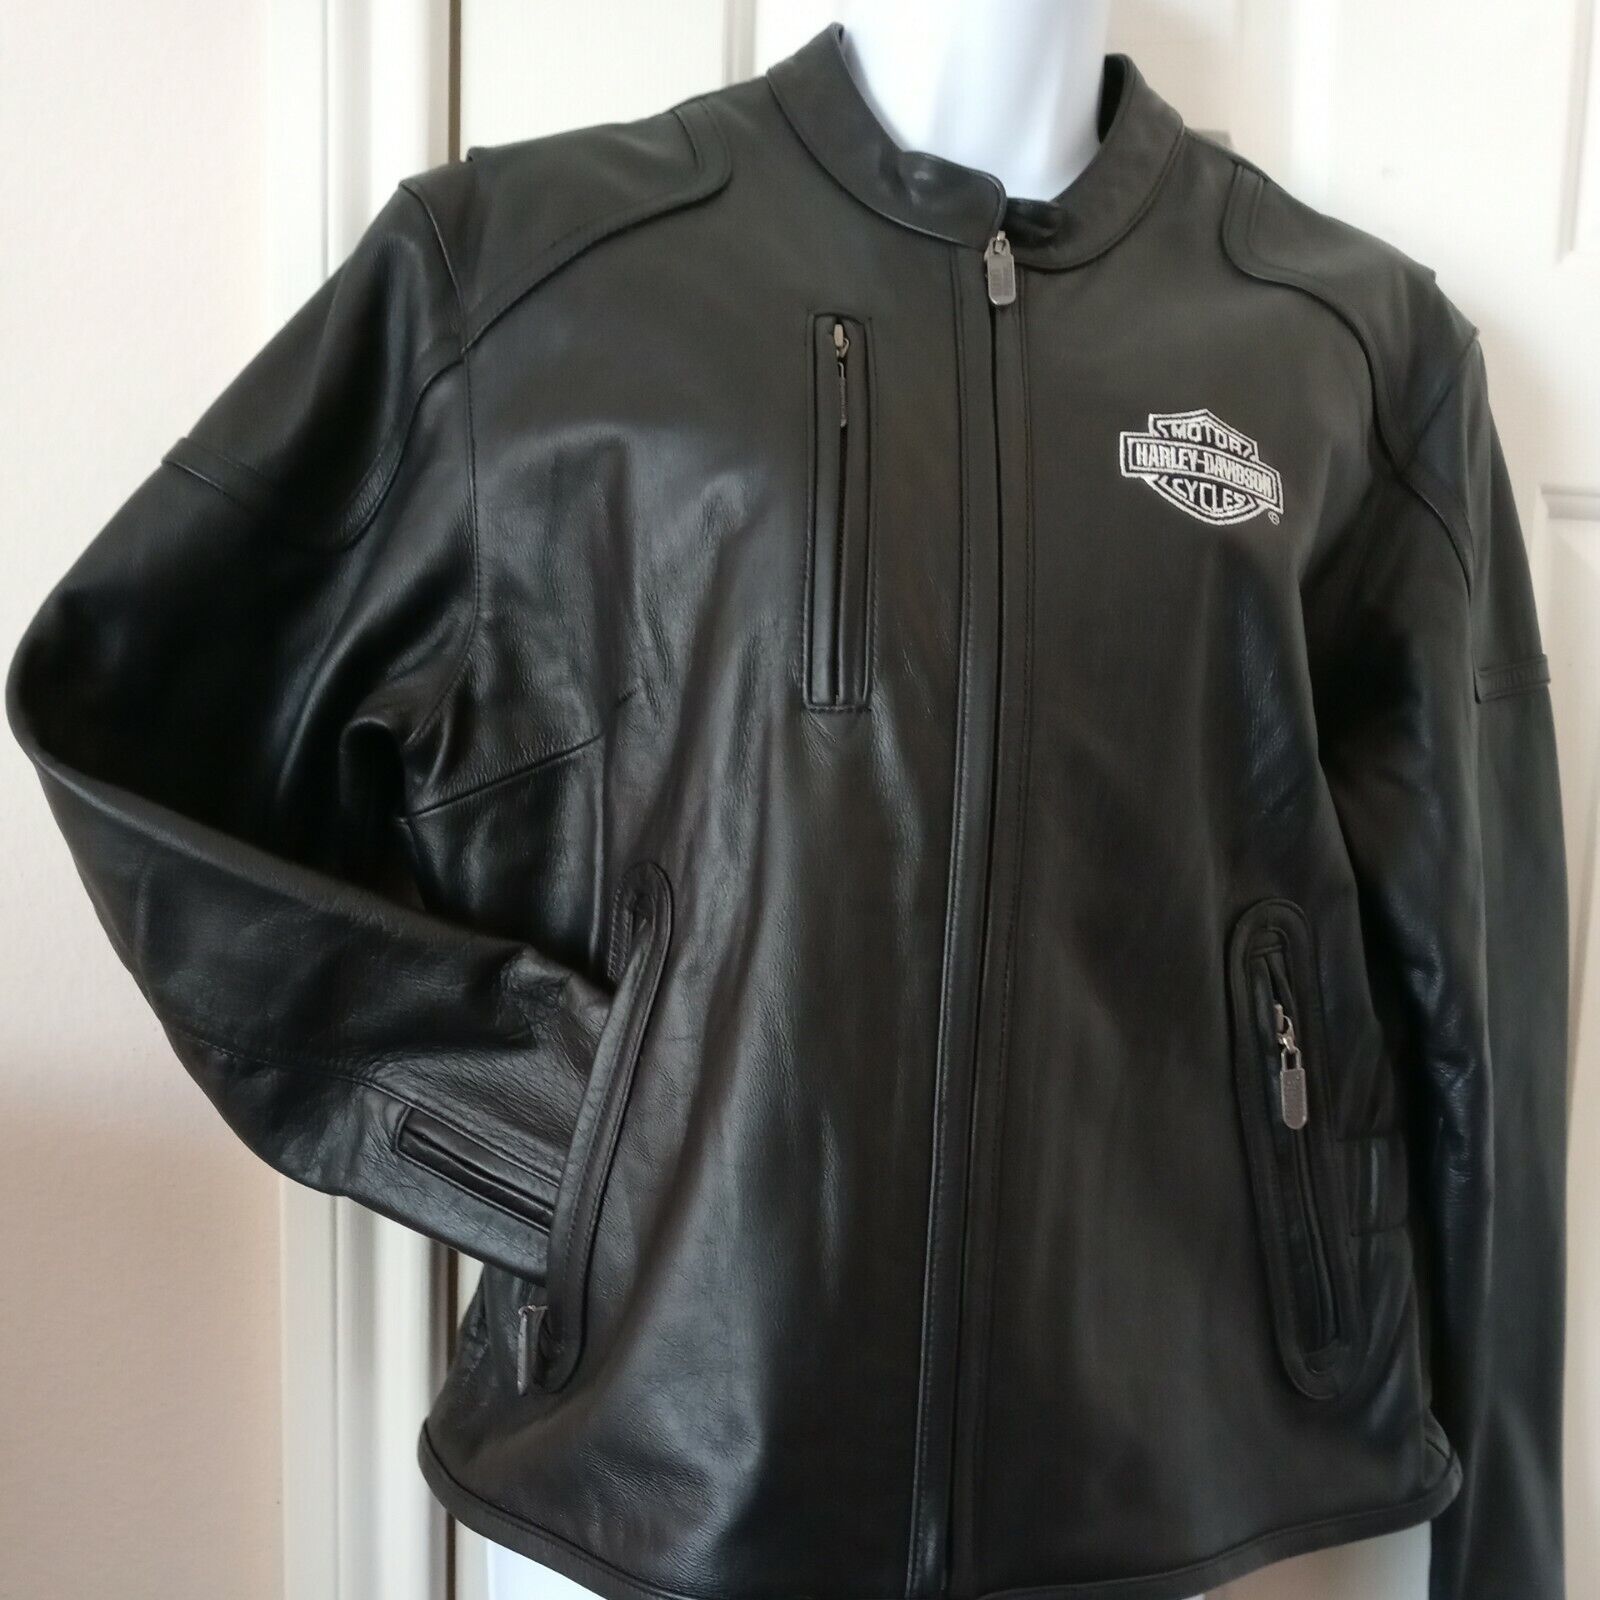 NEW⭐HARLEY DAVIDSON WOMEN\'S LEATHER JACKET ZIP OUT LINER LARGE